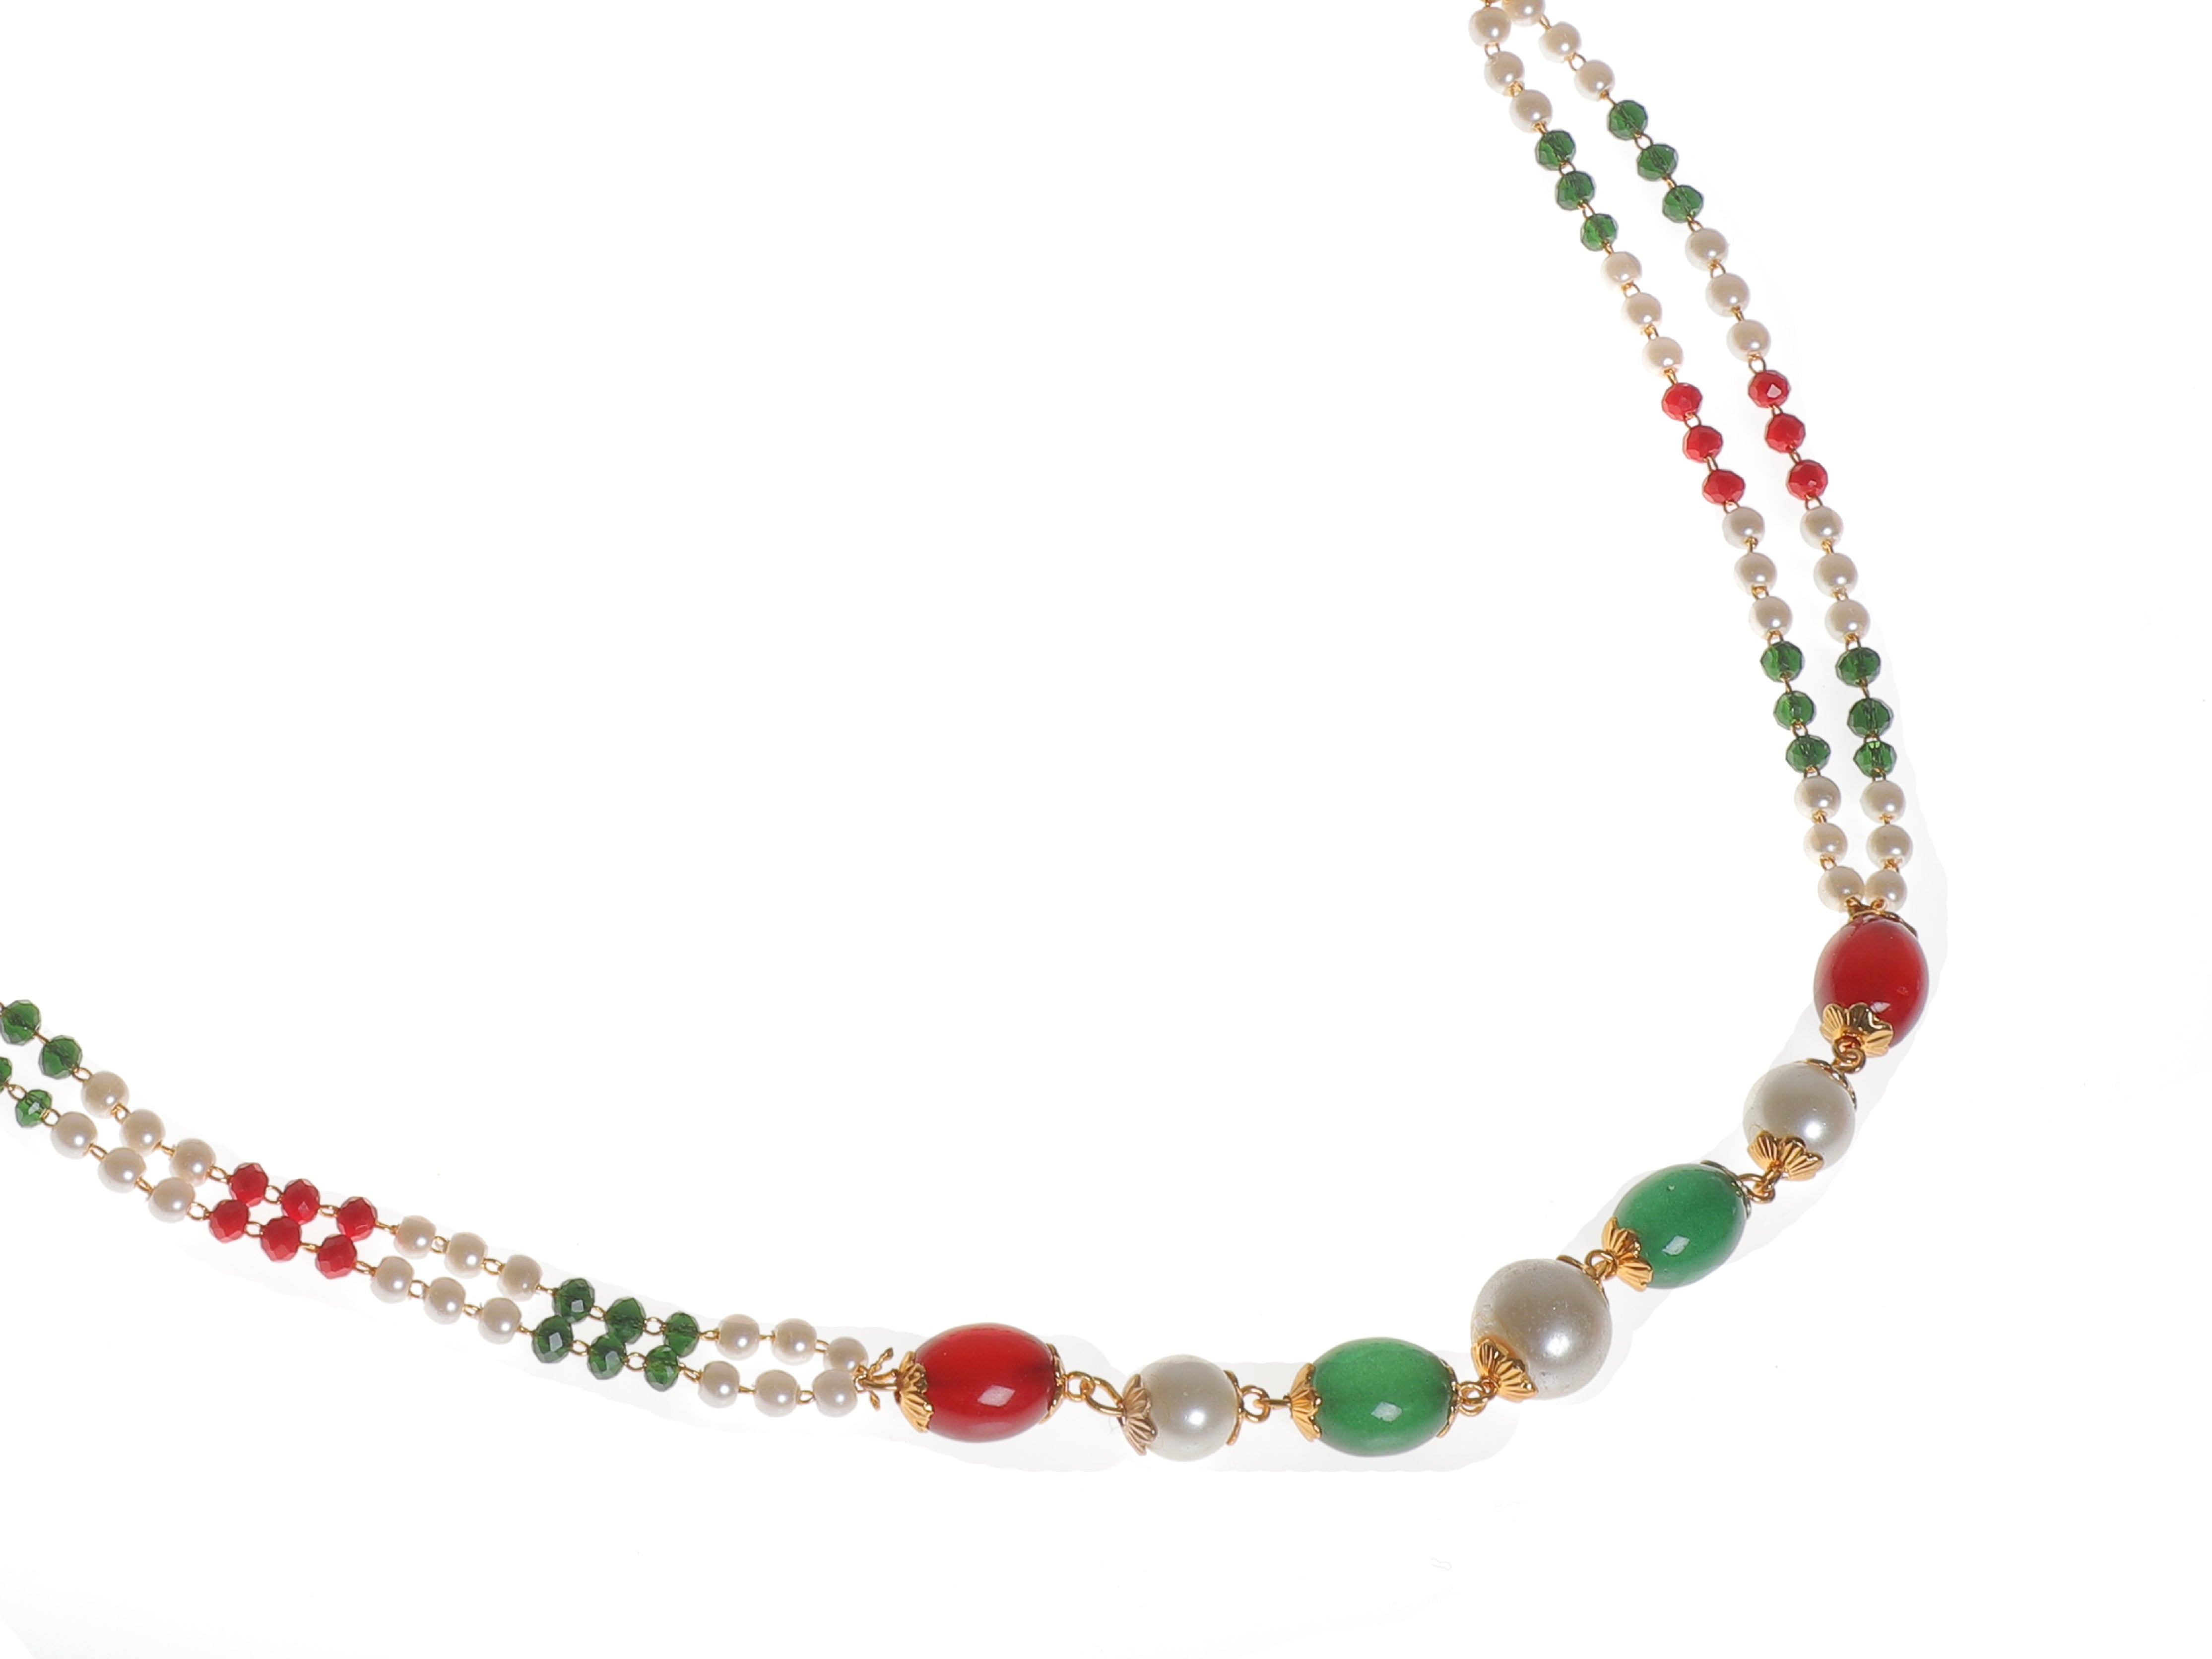 Indian Jewellery from Meira Jewellery:Necklace,Meira jewellery rajwada pearl double line strand with earrings